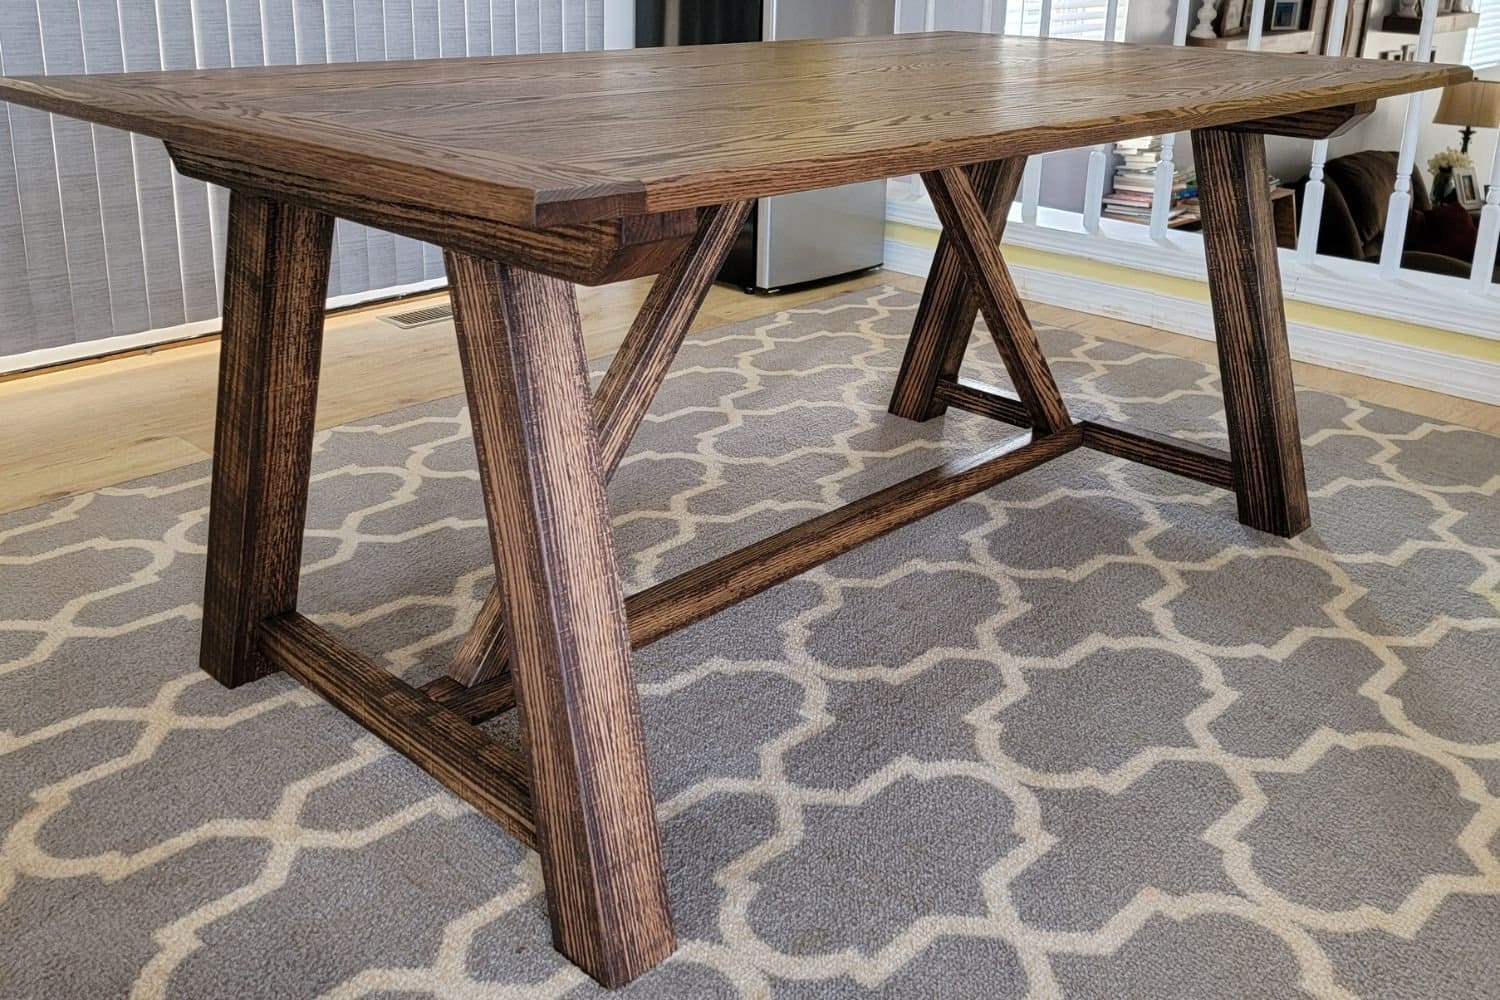 Which Finish Is Most Durable For A Dining Room Table?